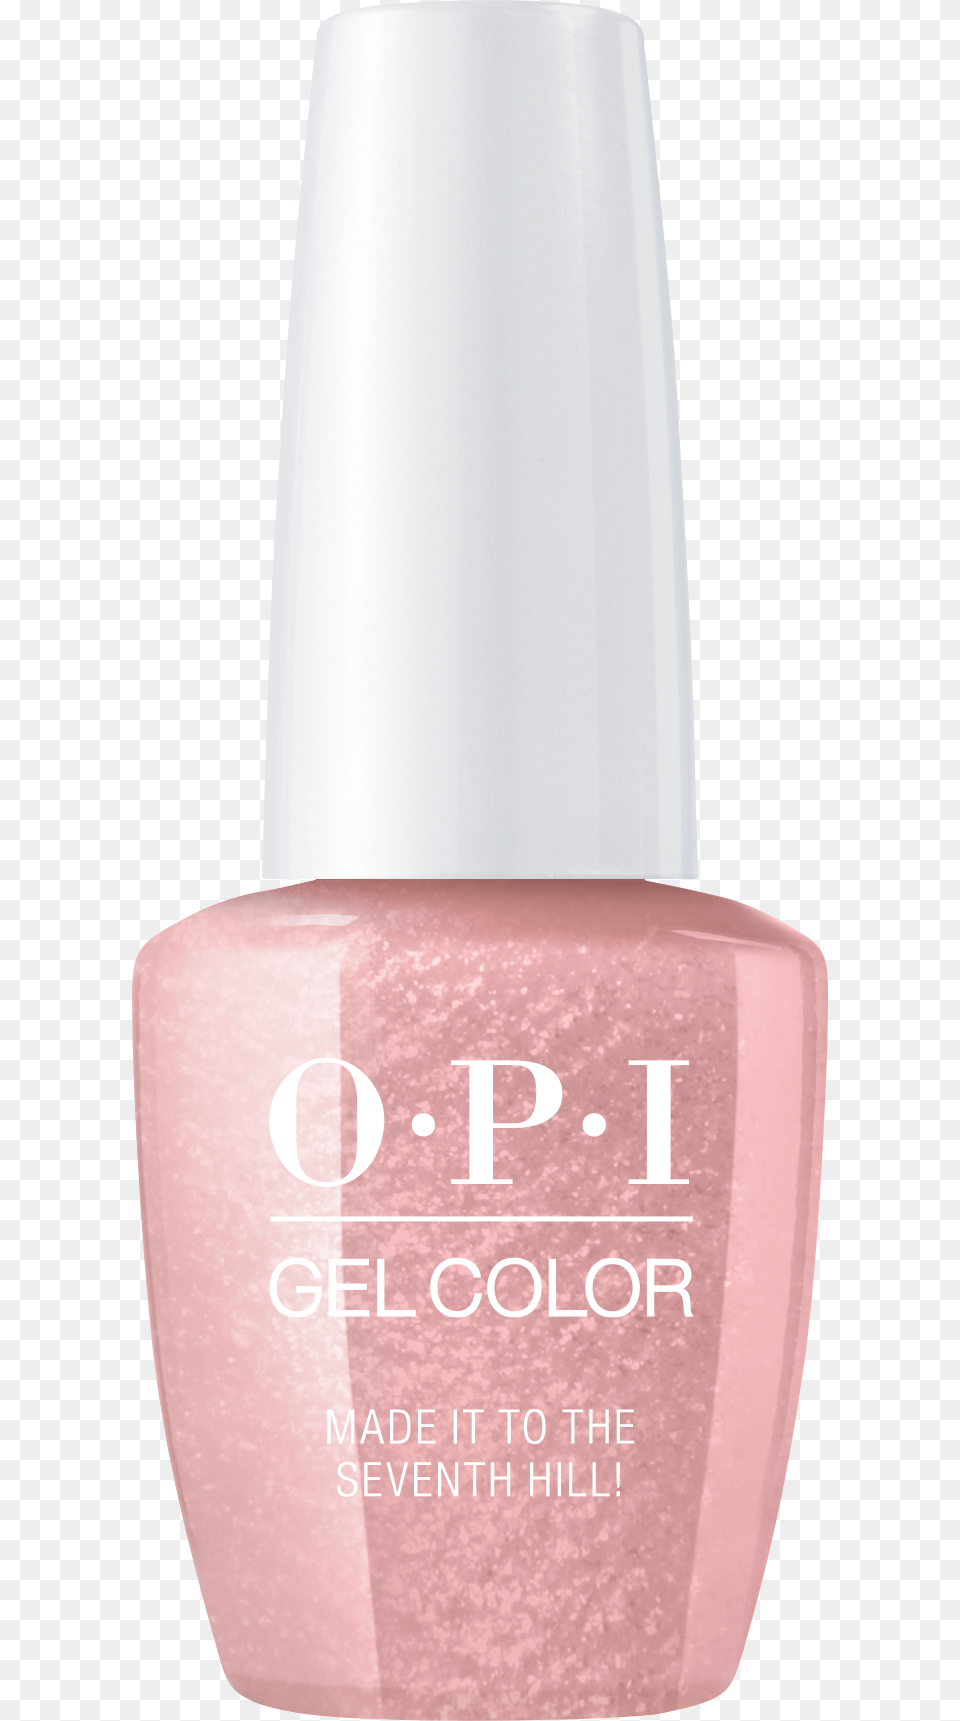 Made It Ti The Seventh Hill Opi Nail Polish Hopelessly Devoted, Cosmetics, Bottle, Perfume, Nail Polish Png